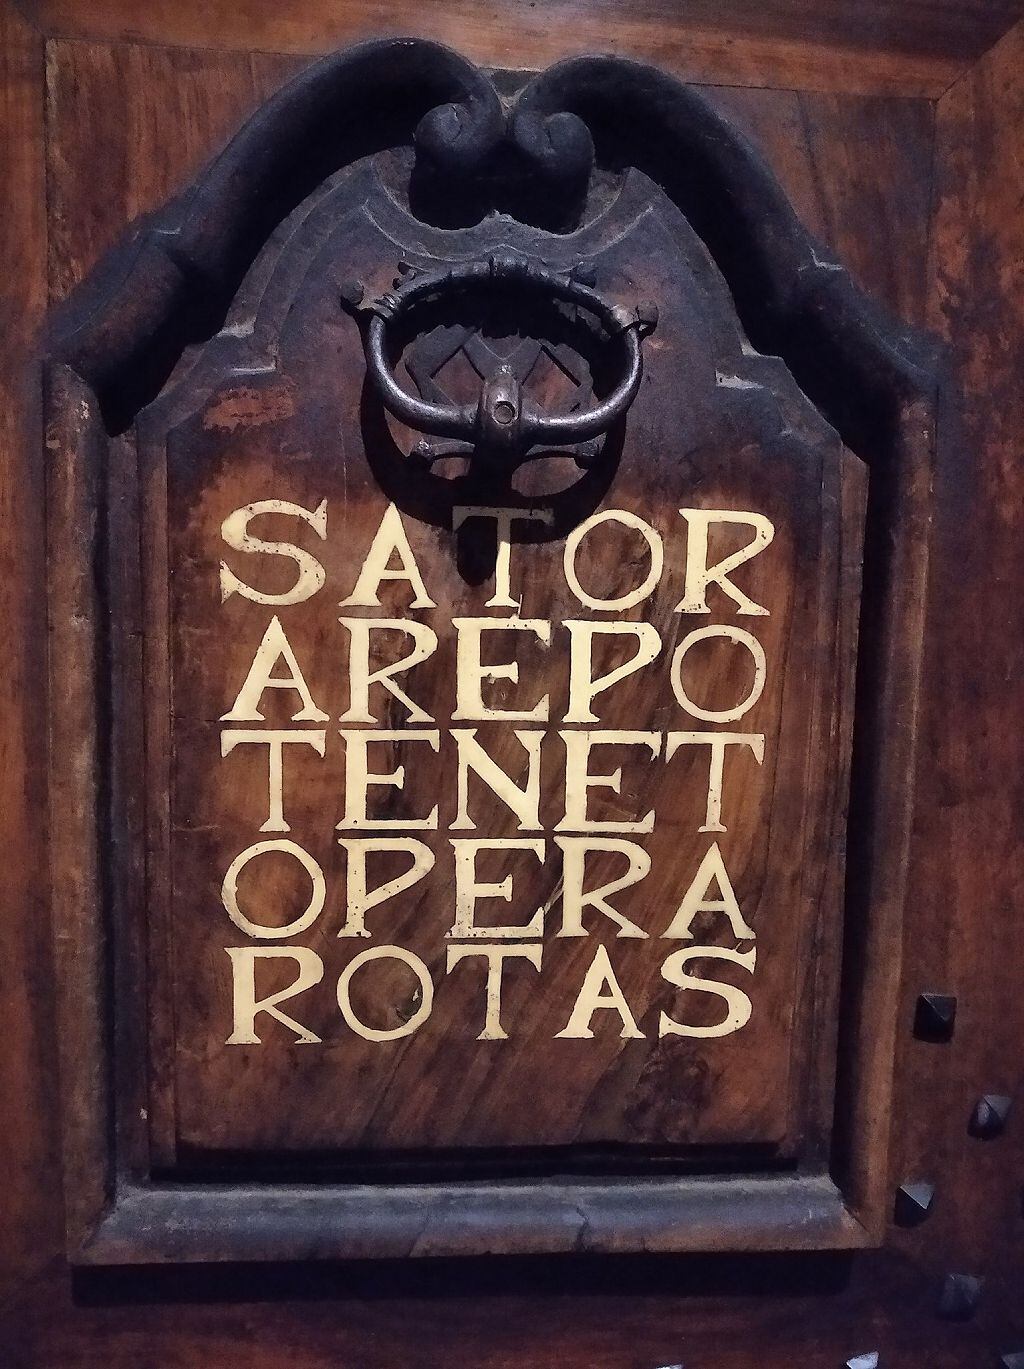 Engraved on a door in Grenoble (France)... Who will be able to decipher them, mathematicians, philologists or theologians?